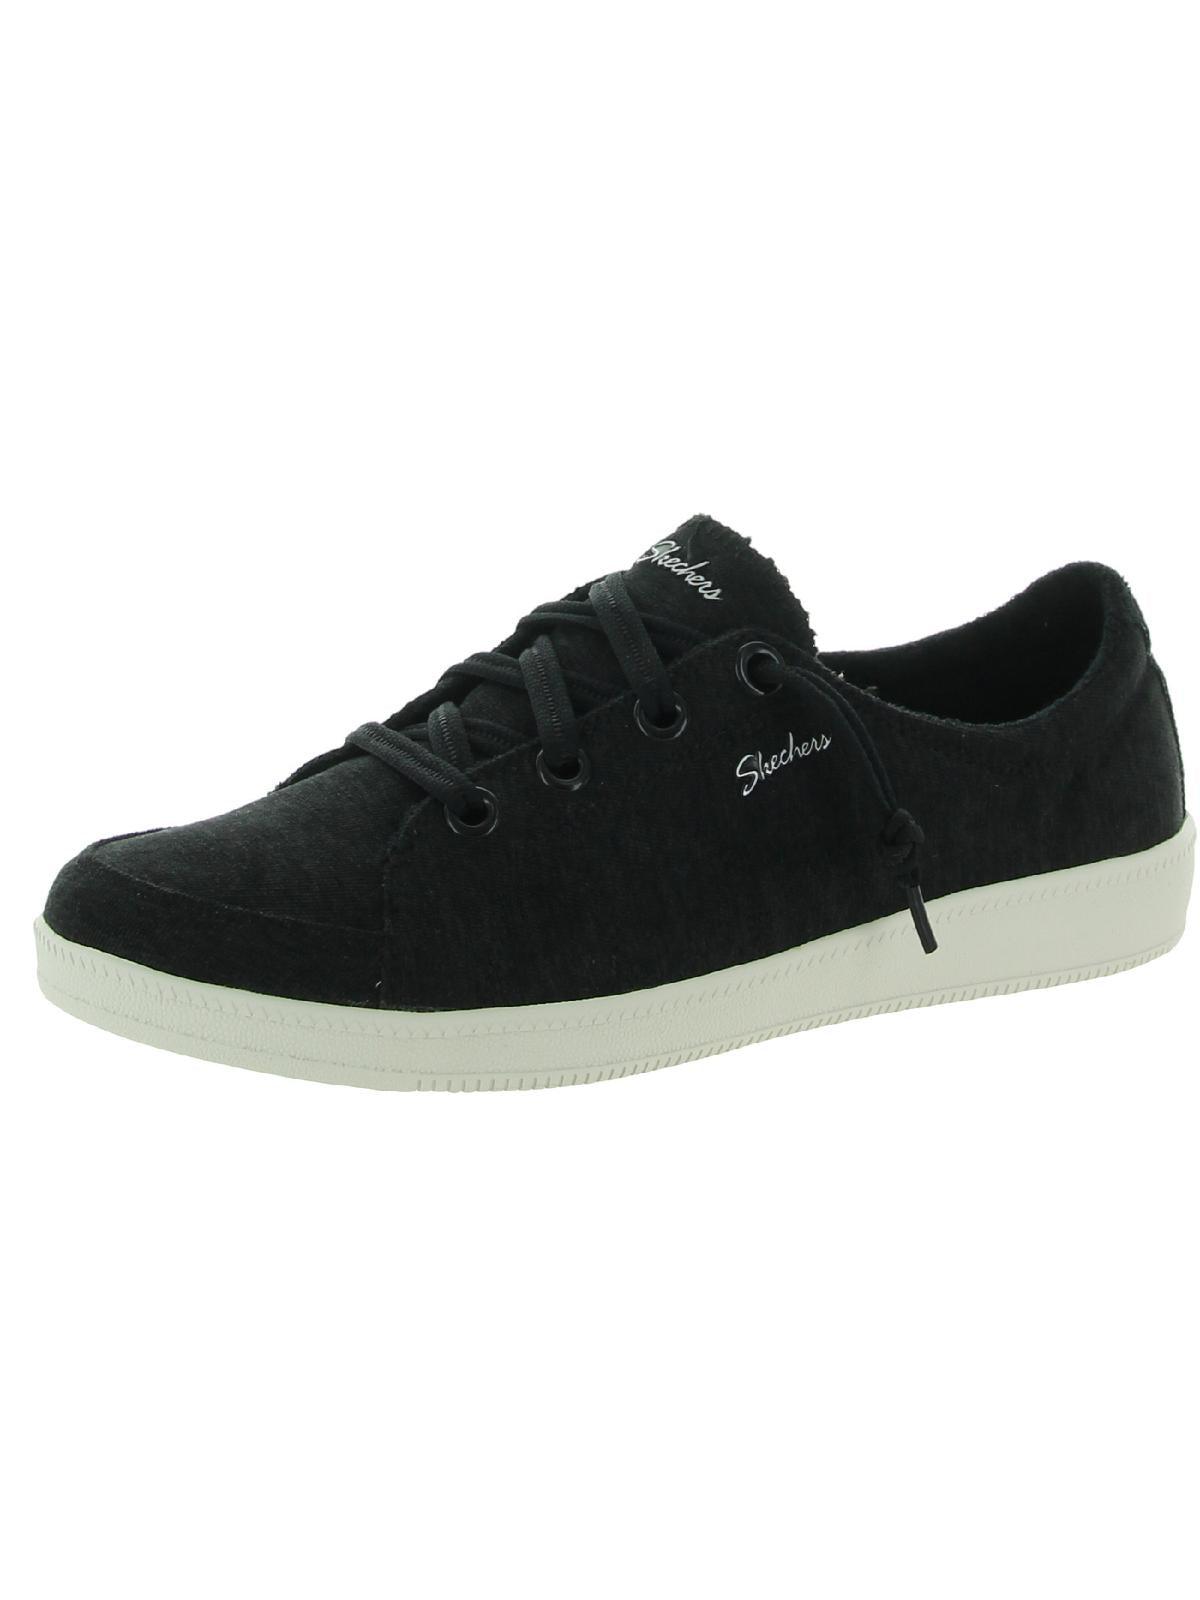 Skechers Madison Ave- Inner City Lace Up Lifestyle Casual Shoes in Black |  Lyst